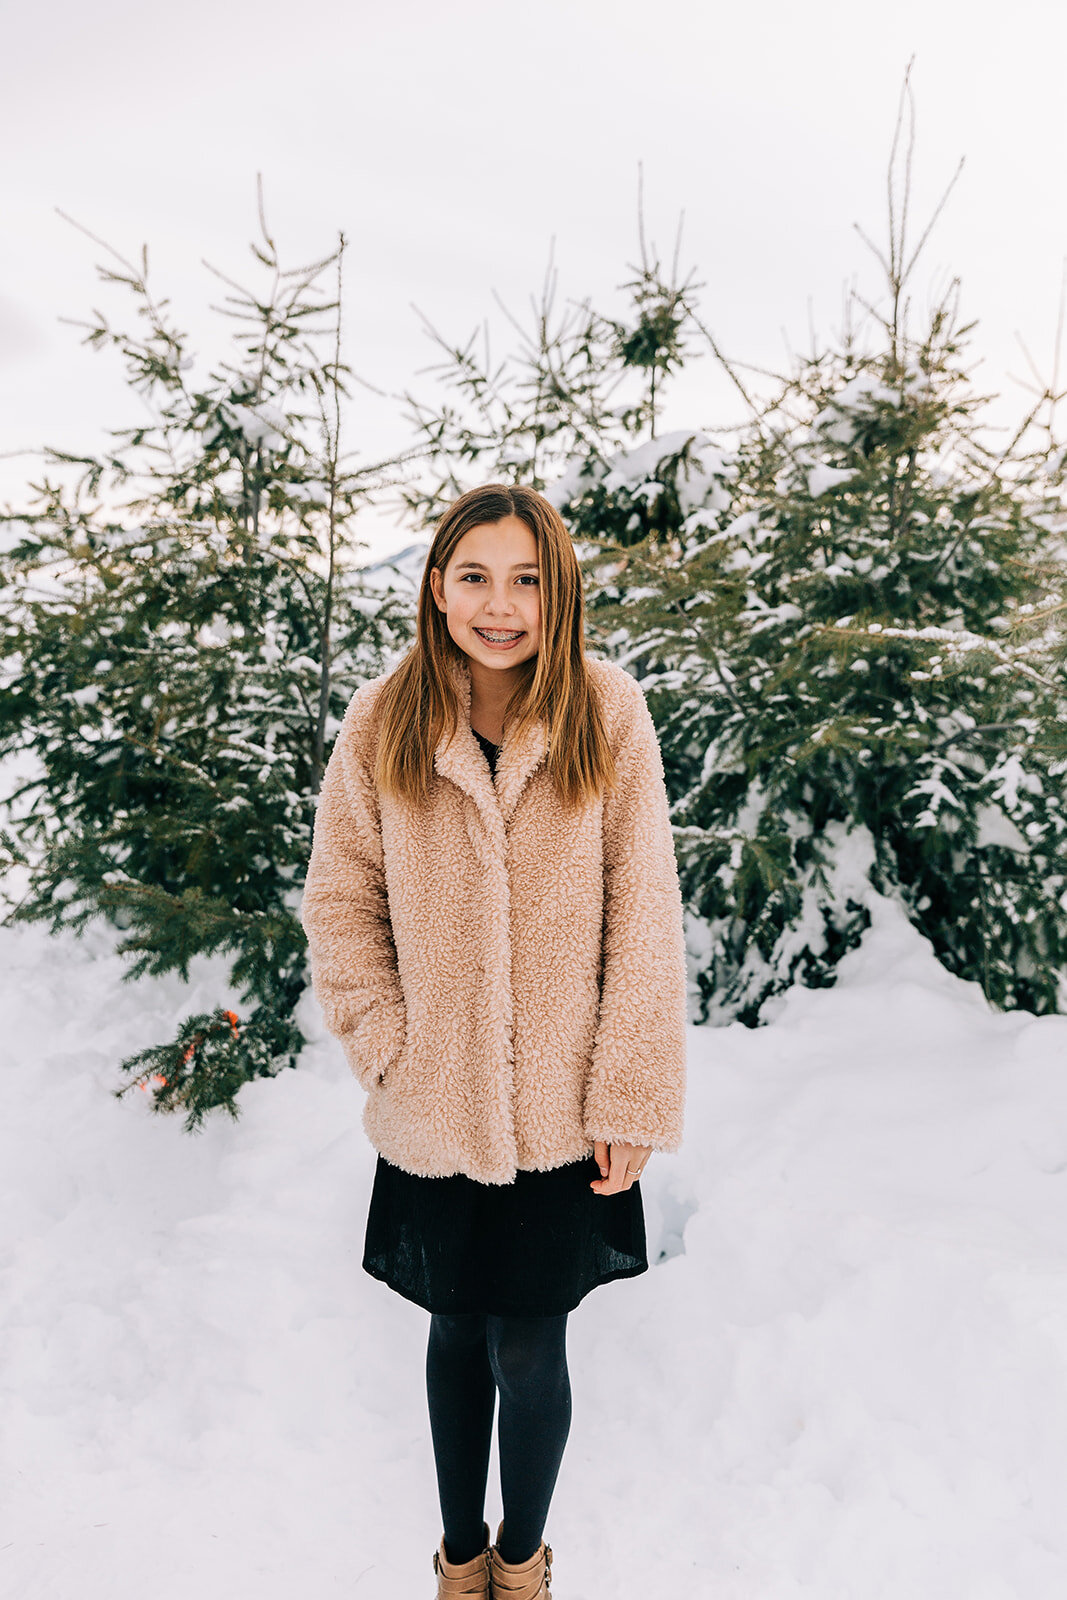  preteen fashion furry coat fuzzy coat braces winter fashion family pictures daughters family picture styling inspiration family pose ideas winter photoshoot snowy pictures adams acres tree farm family photographers in utah professional family photog